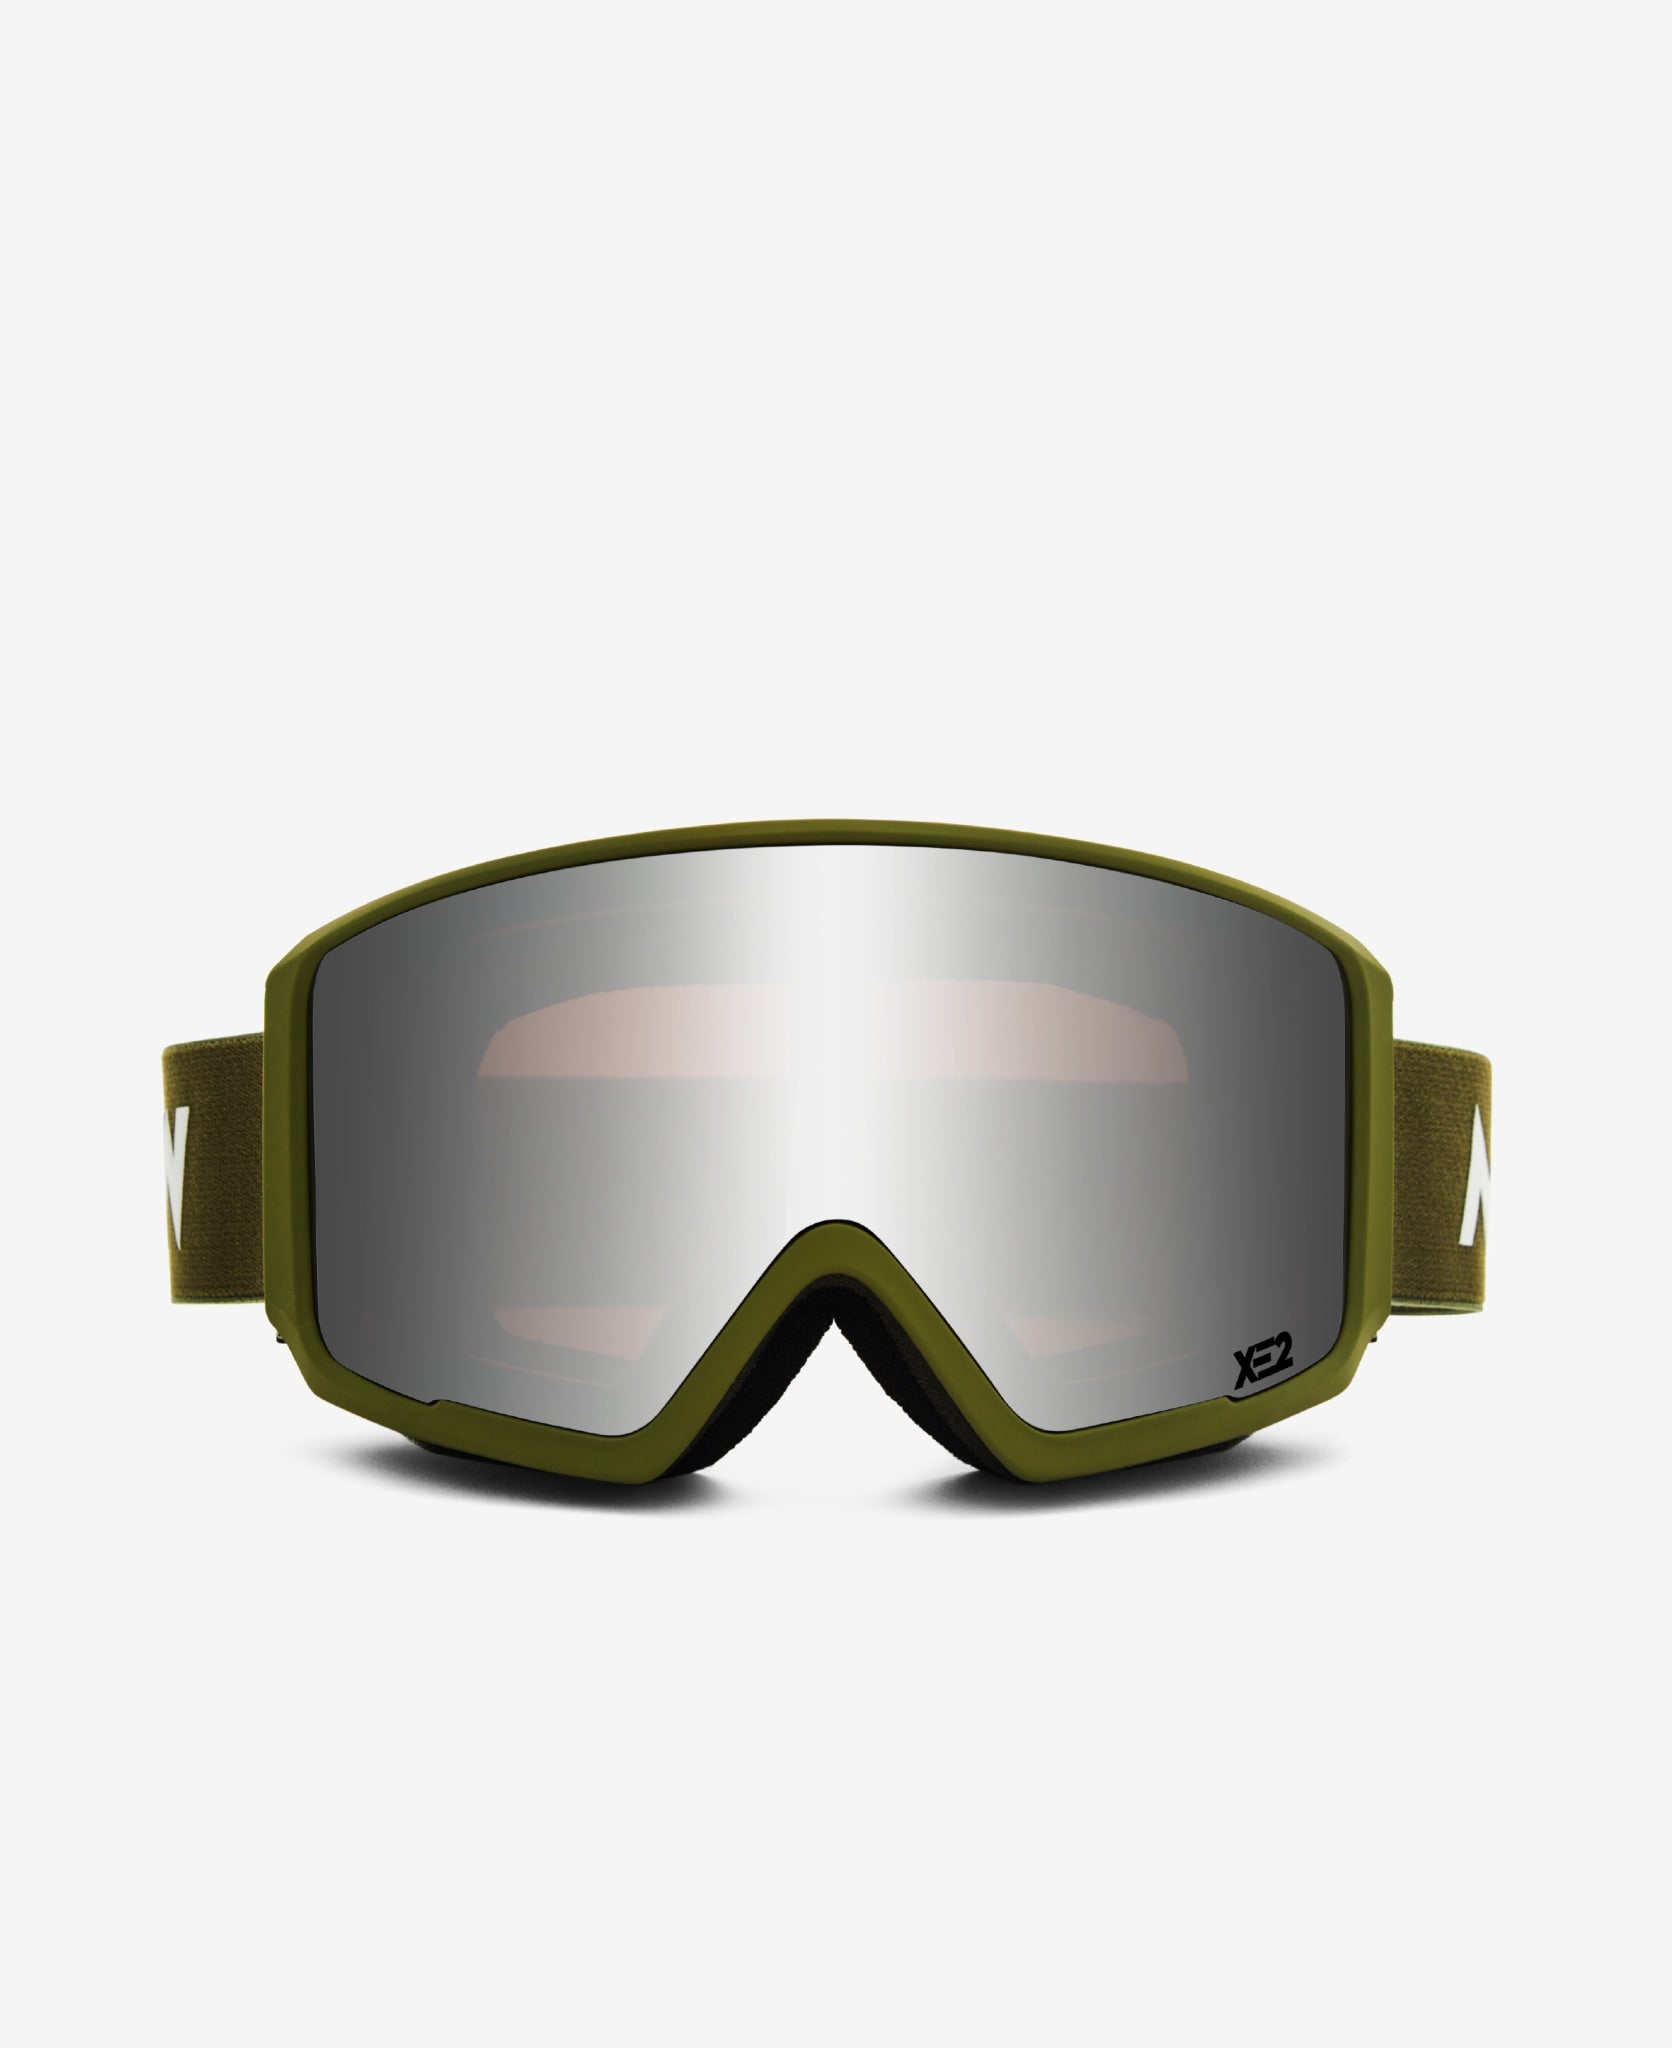 Snow Goggles | High Contrast, Magnetic & Photochromic | MessyWeekend